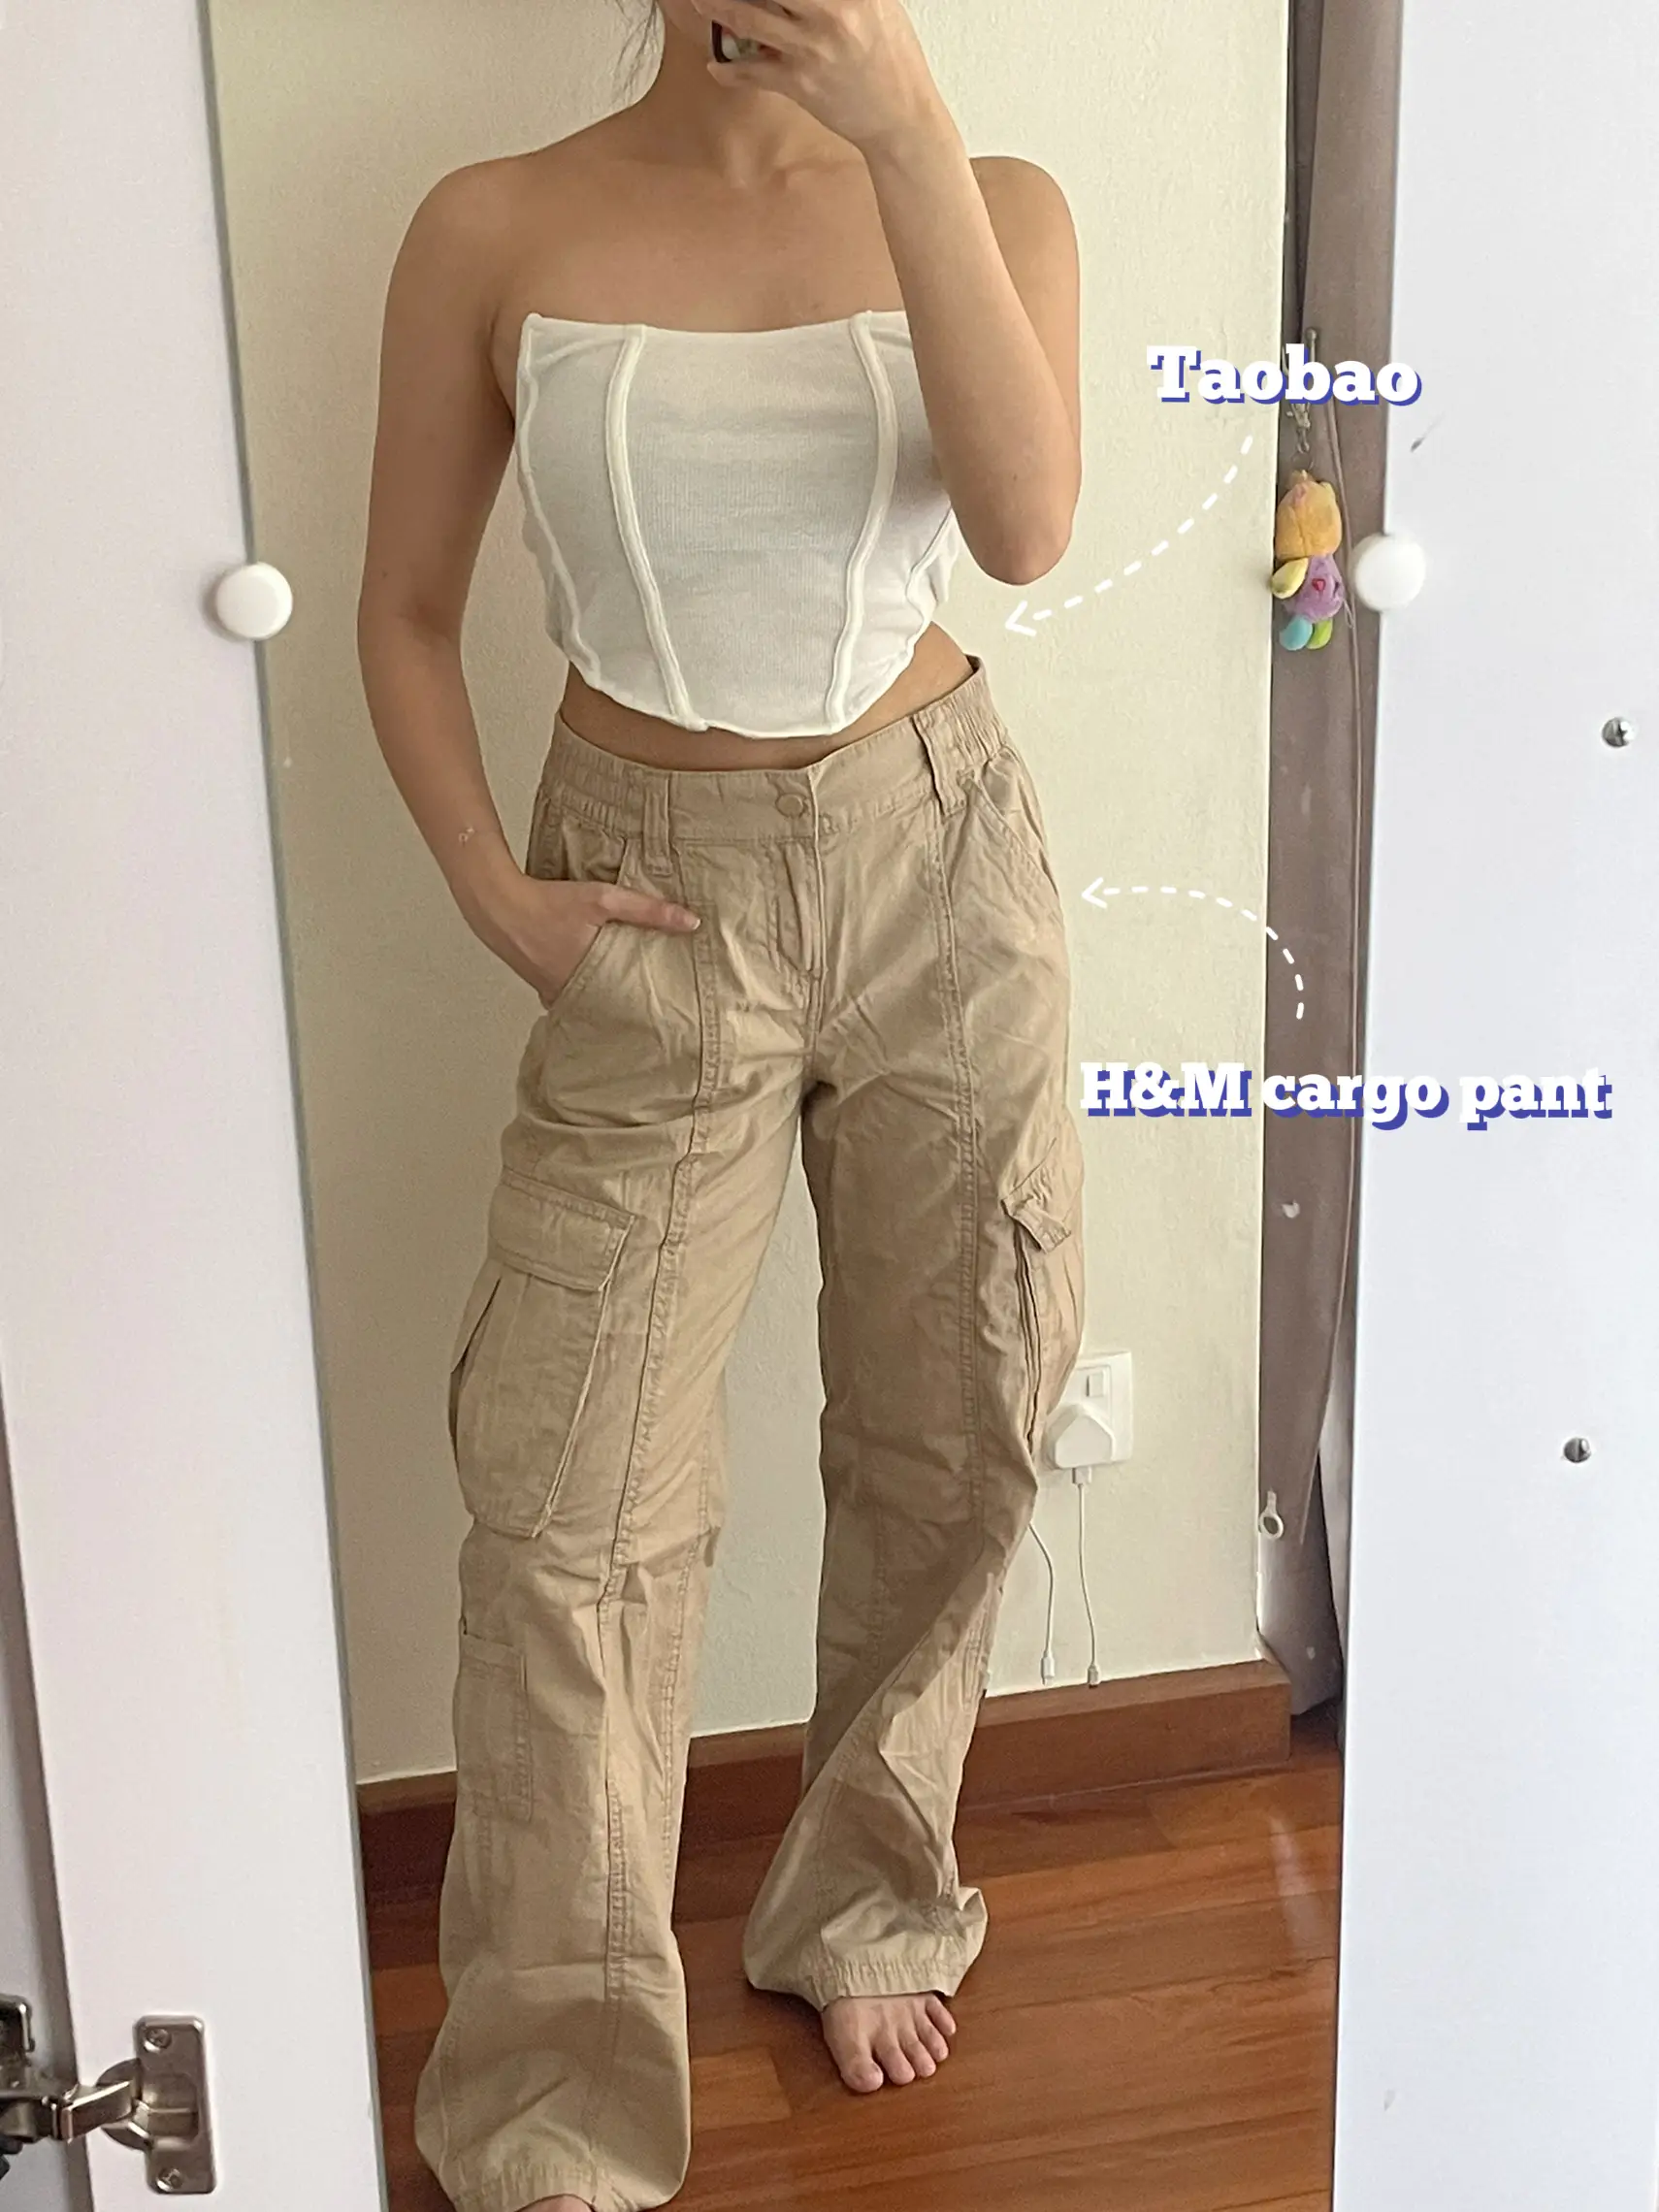 H&M CARGO PANTS REVIEW + STYLING 📦🤔